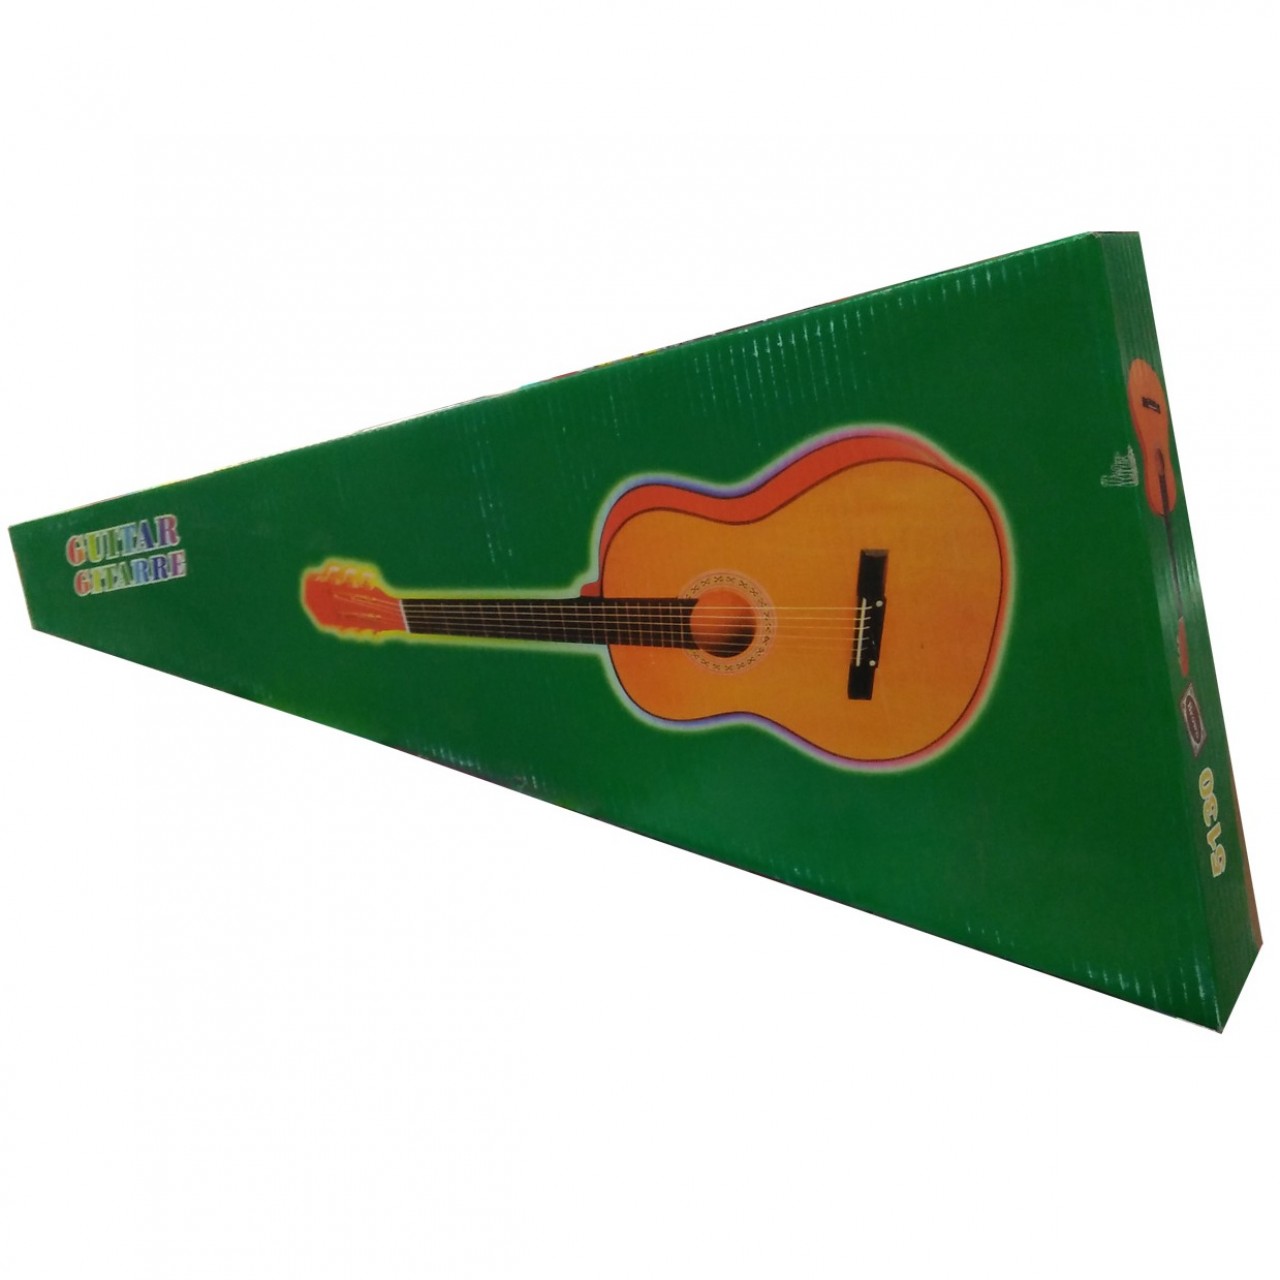 Musical Guitar For Kids 5130 - 21 Inches